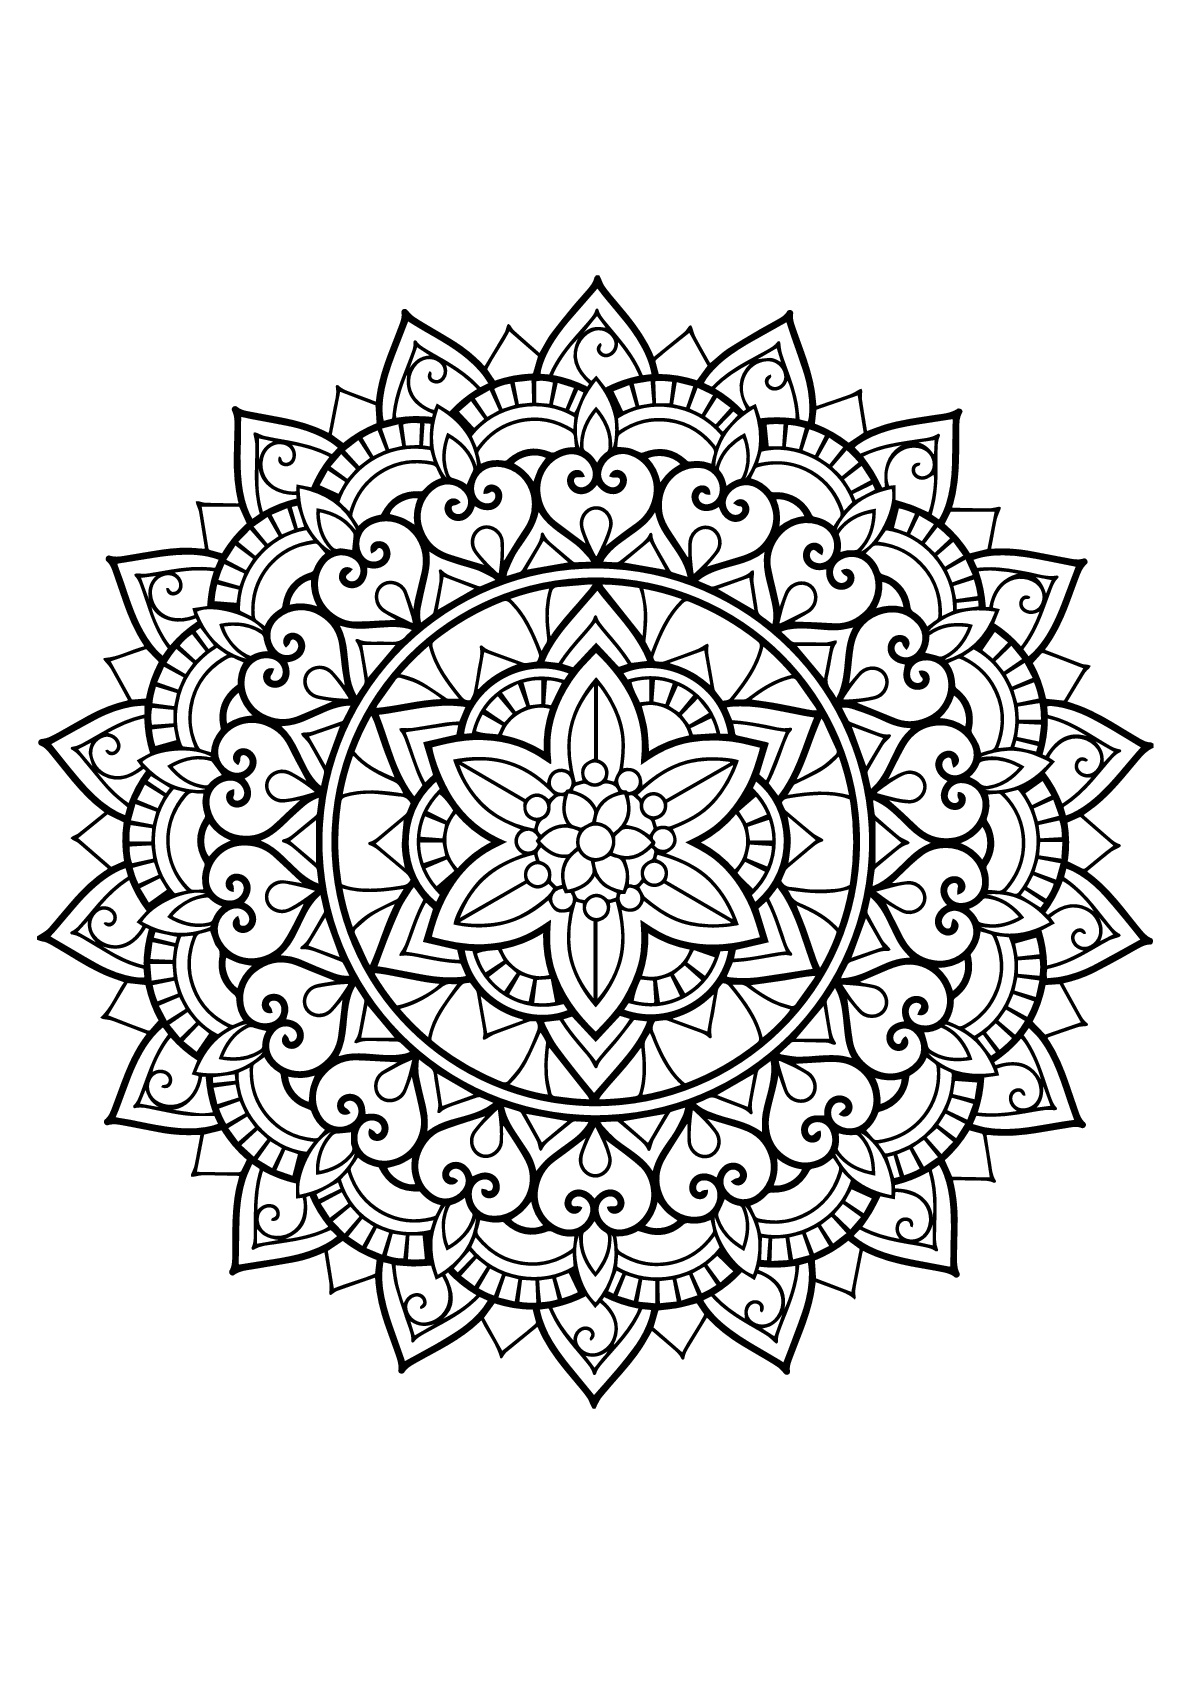 copyright-2-coloring-pages-for-adults